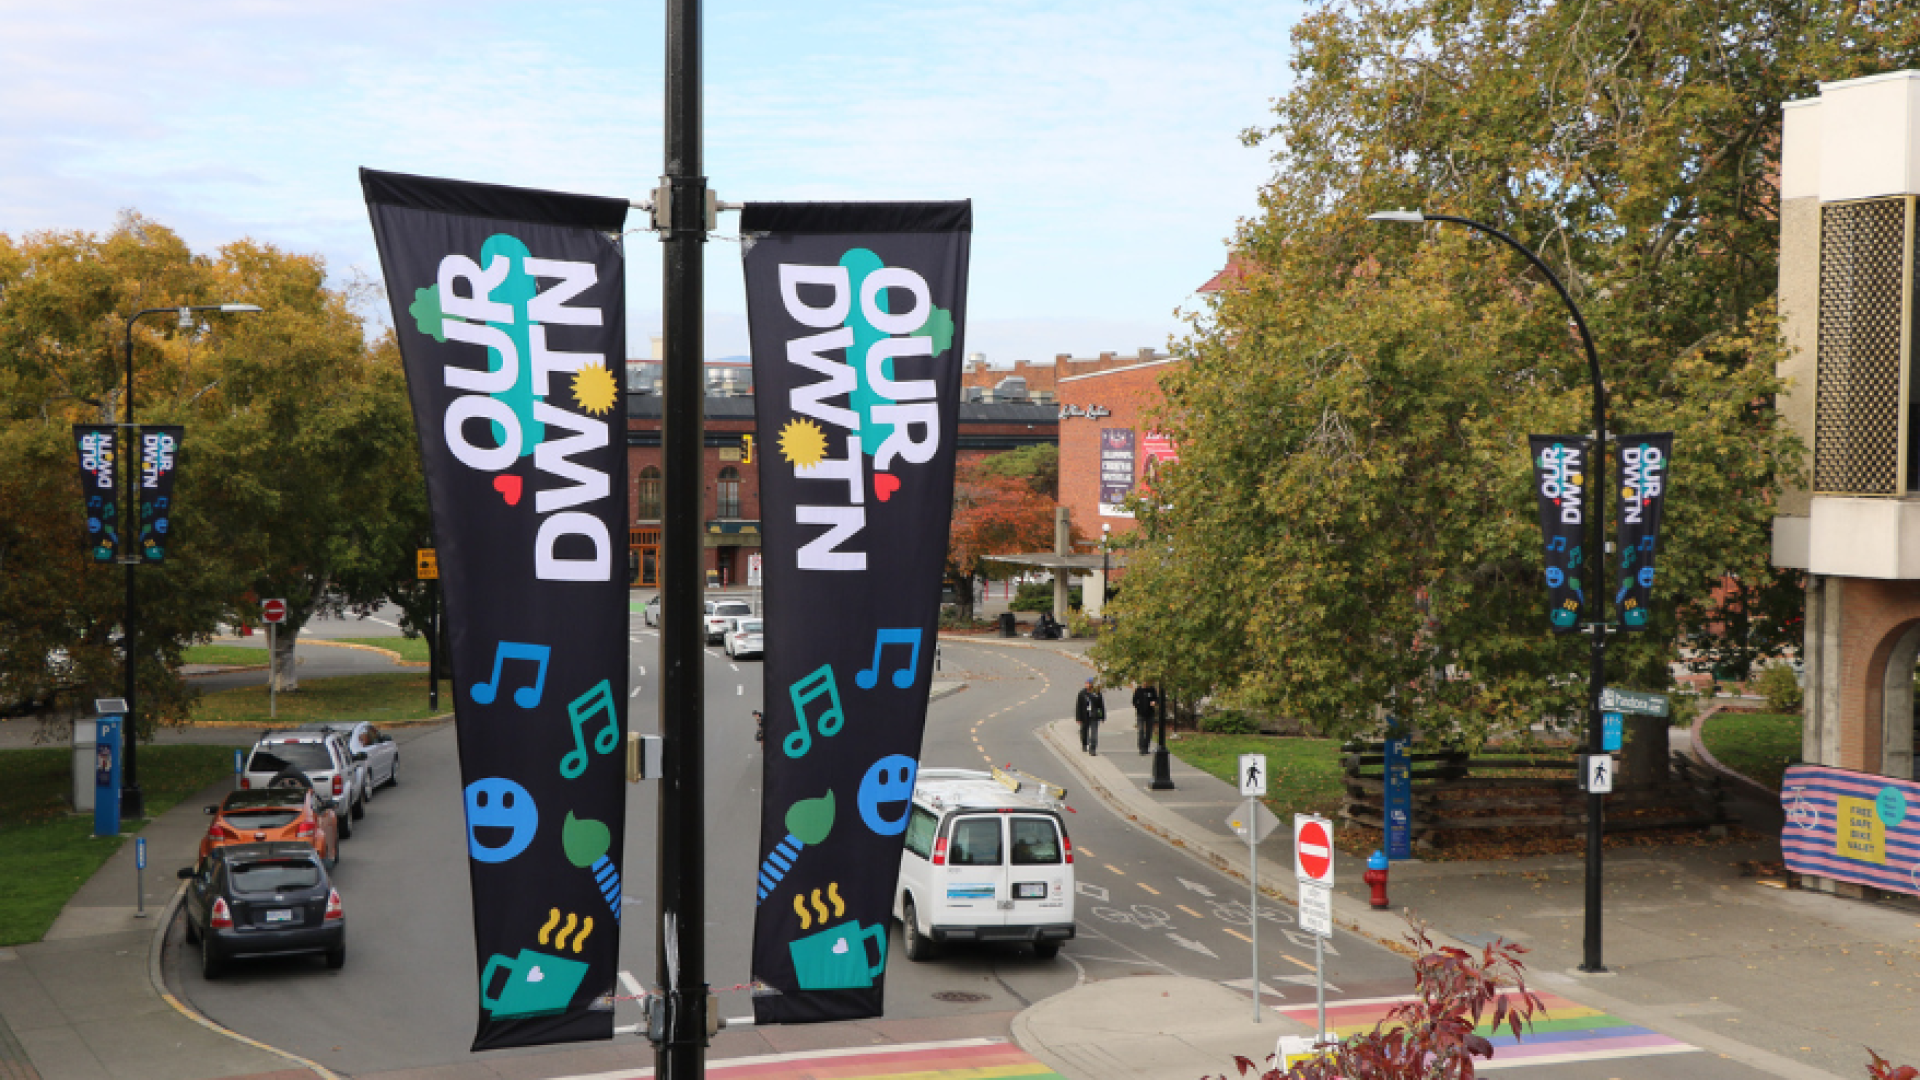 Image of the City's decorative OUR DWTN banners installed on a downtown lamppost on Pandora Avenue.